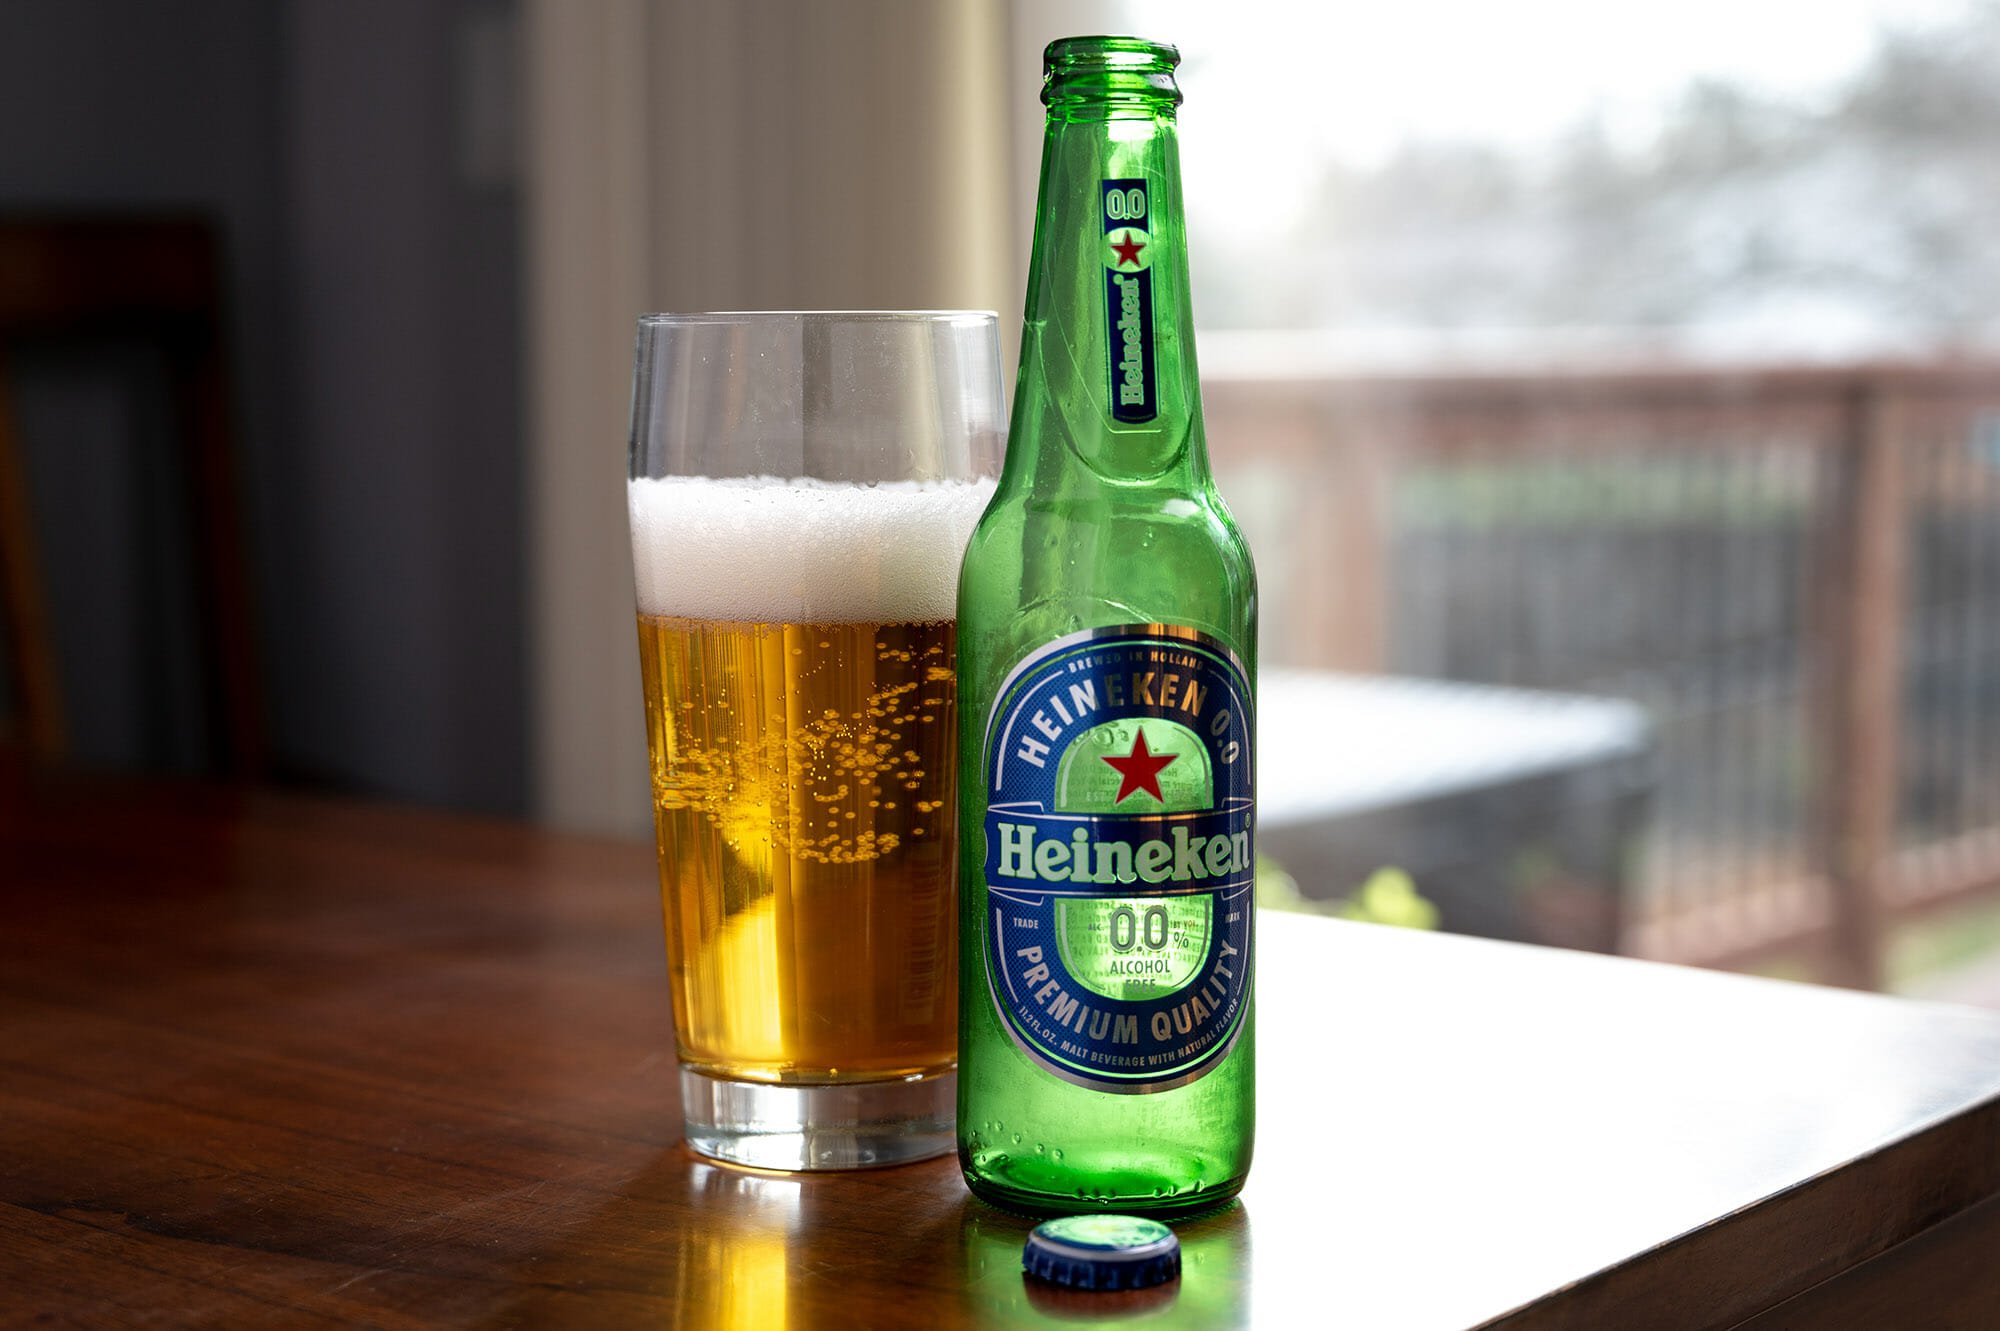 A bottle of non alcoholic beer next to a glass of Heineken.